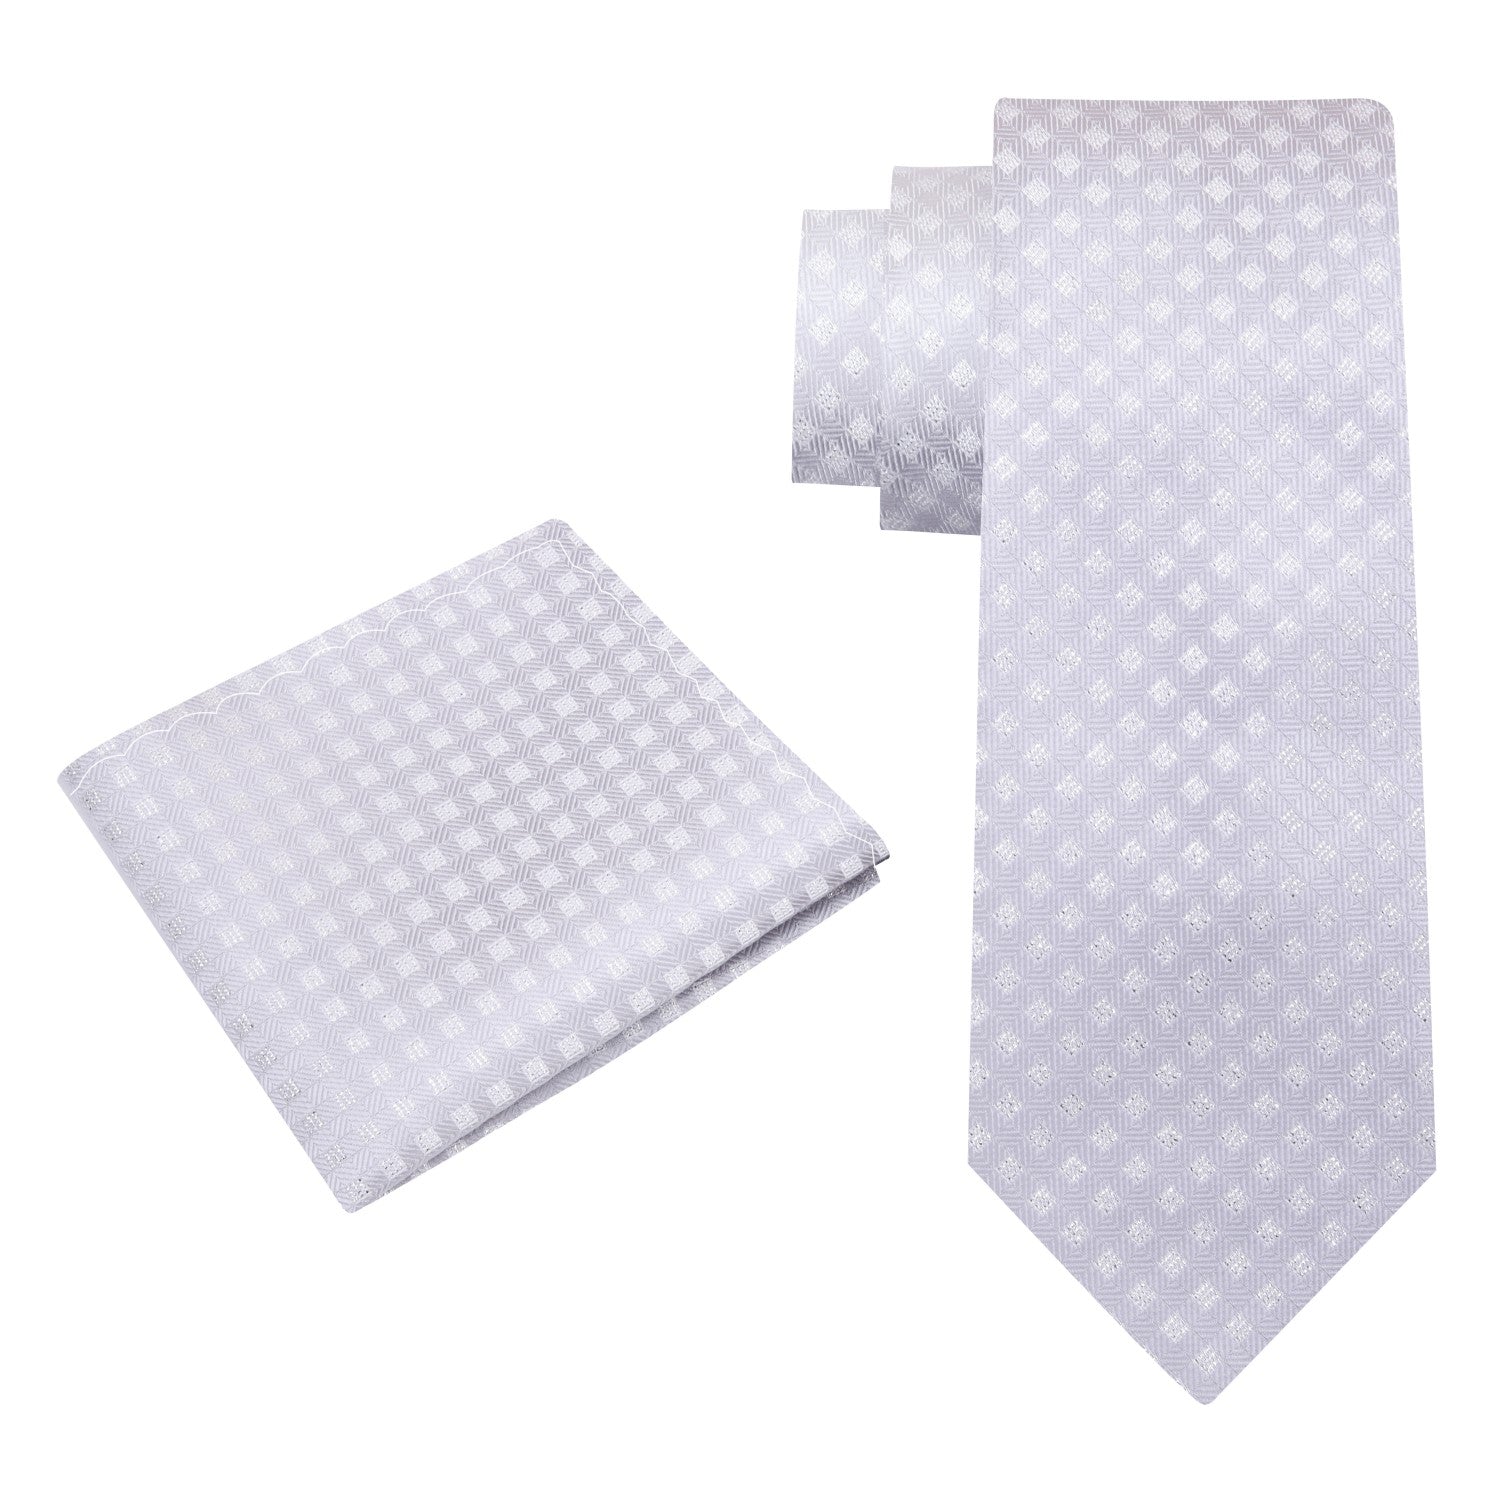 Alt View: A Platinum Colored Tie With Metallic Looking Check Accent Pattern Silk Necktie With Matching Pocket Square